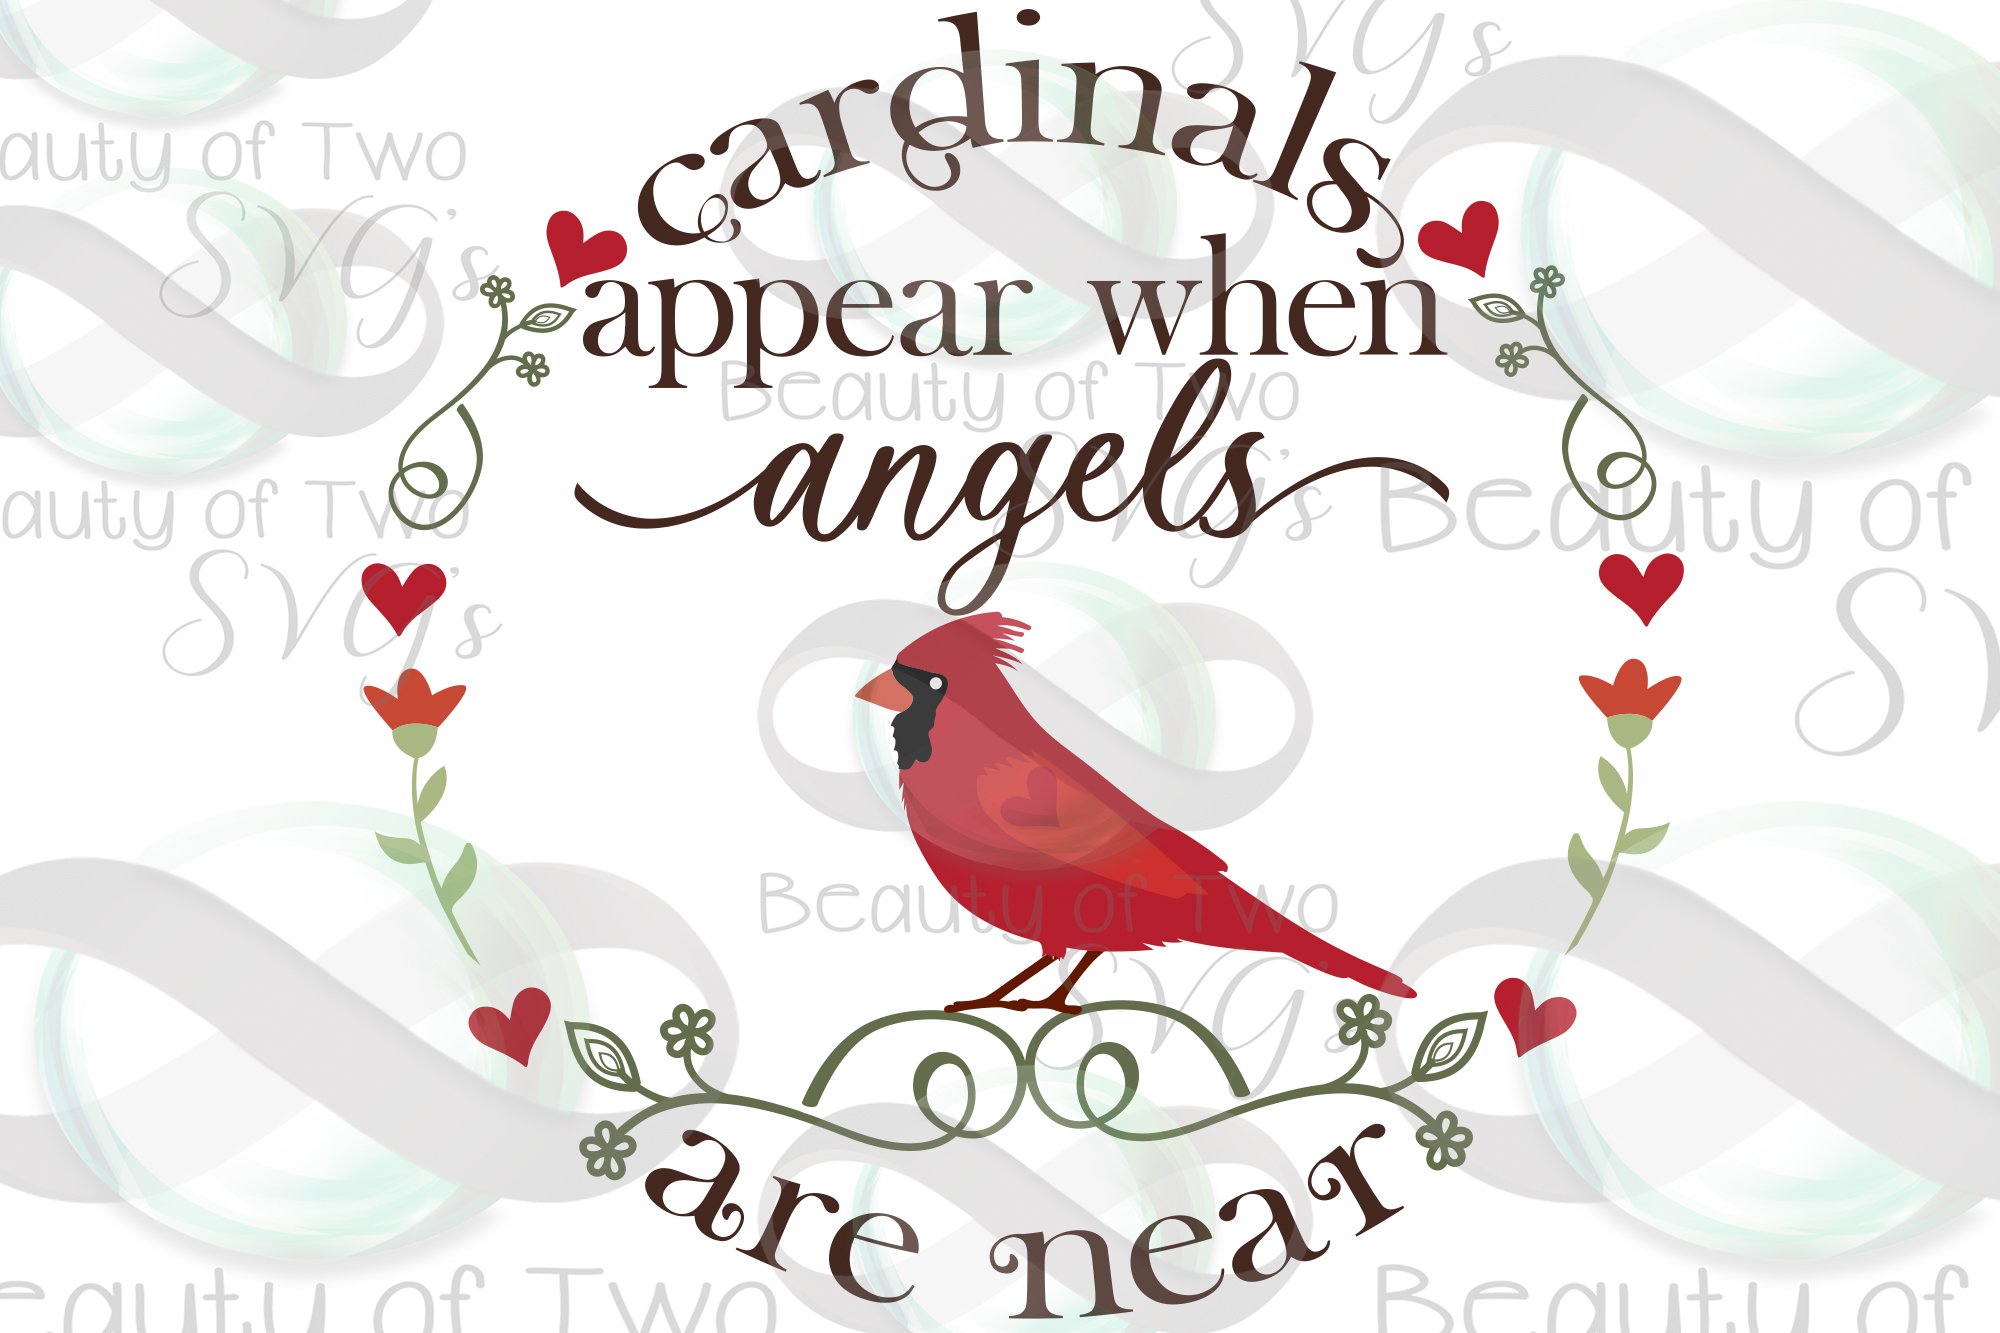 Cardinals appear when angels are near.